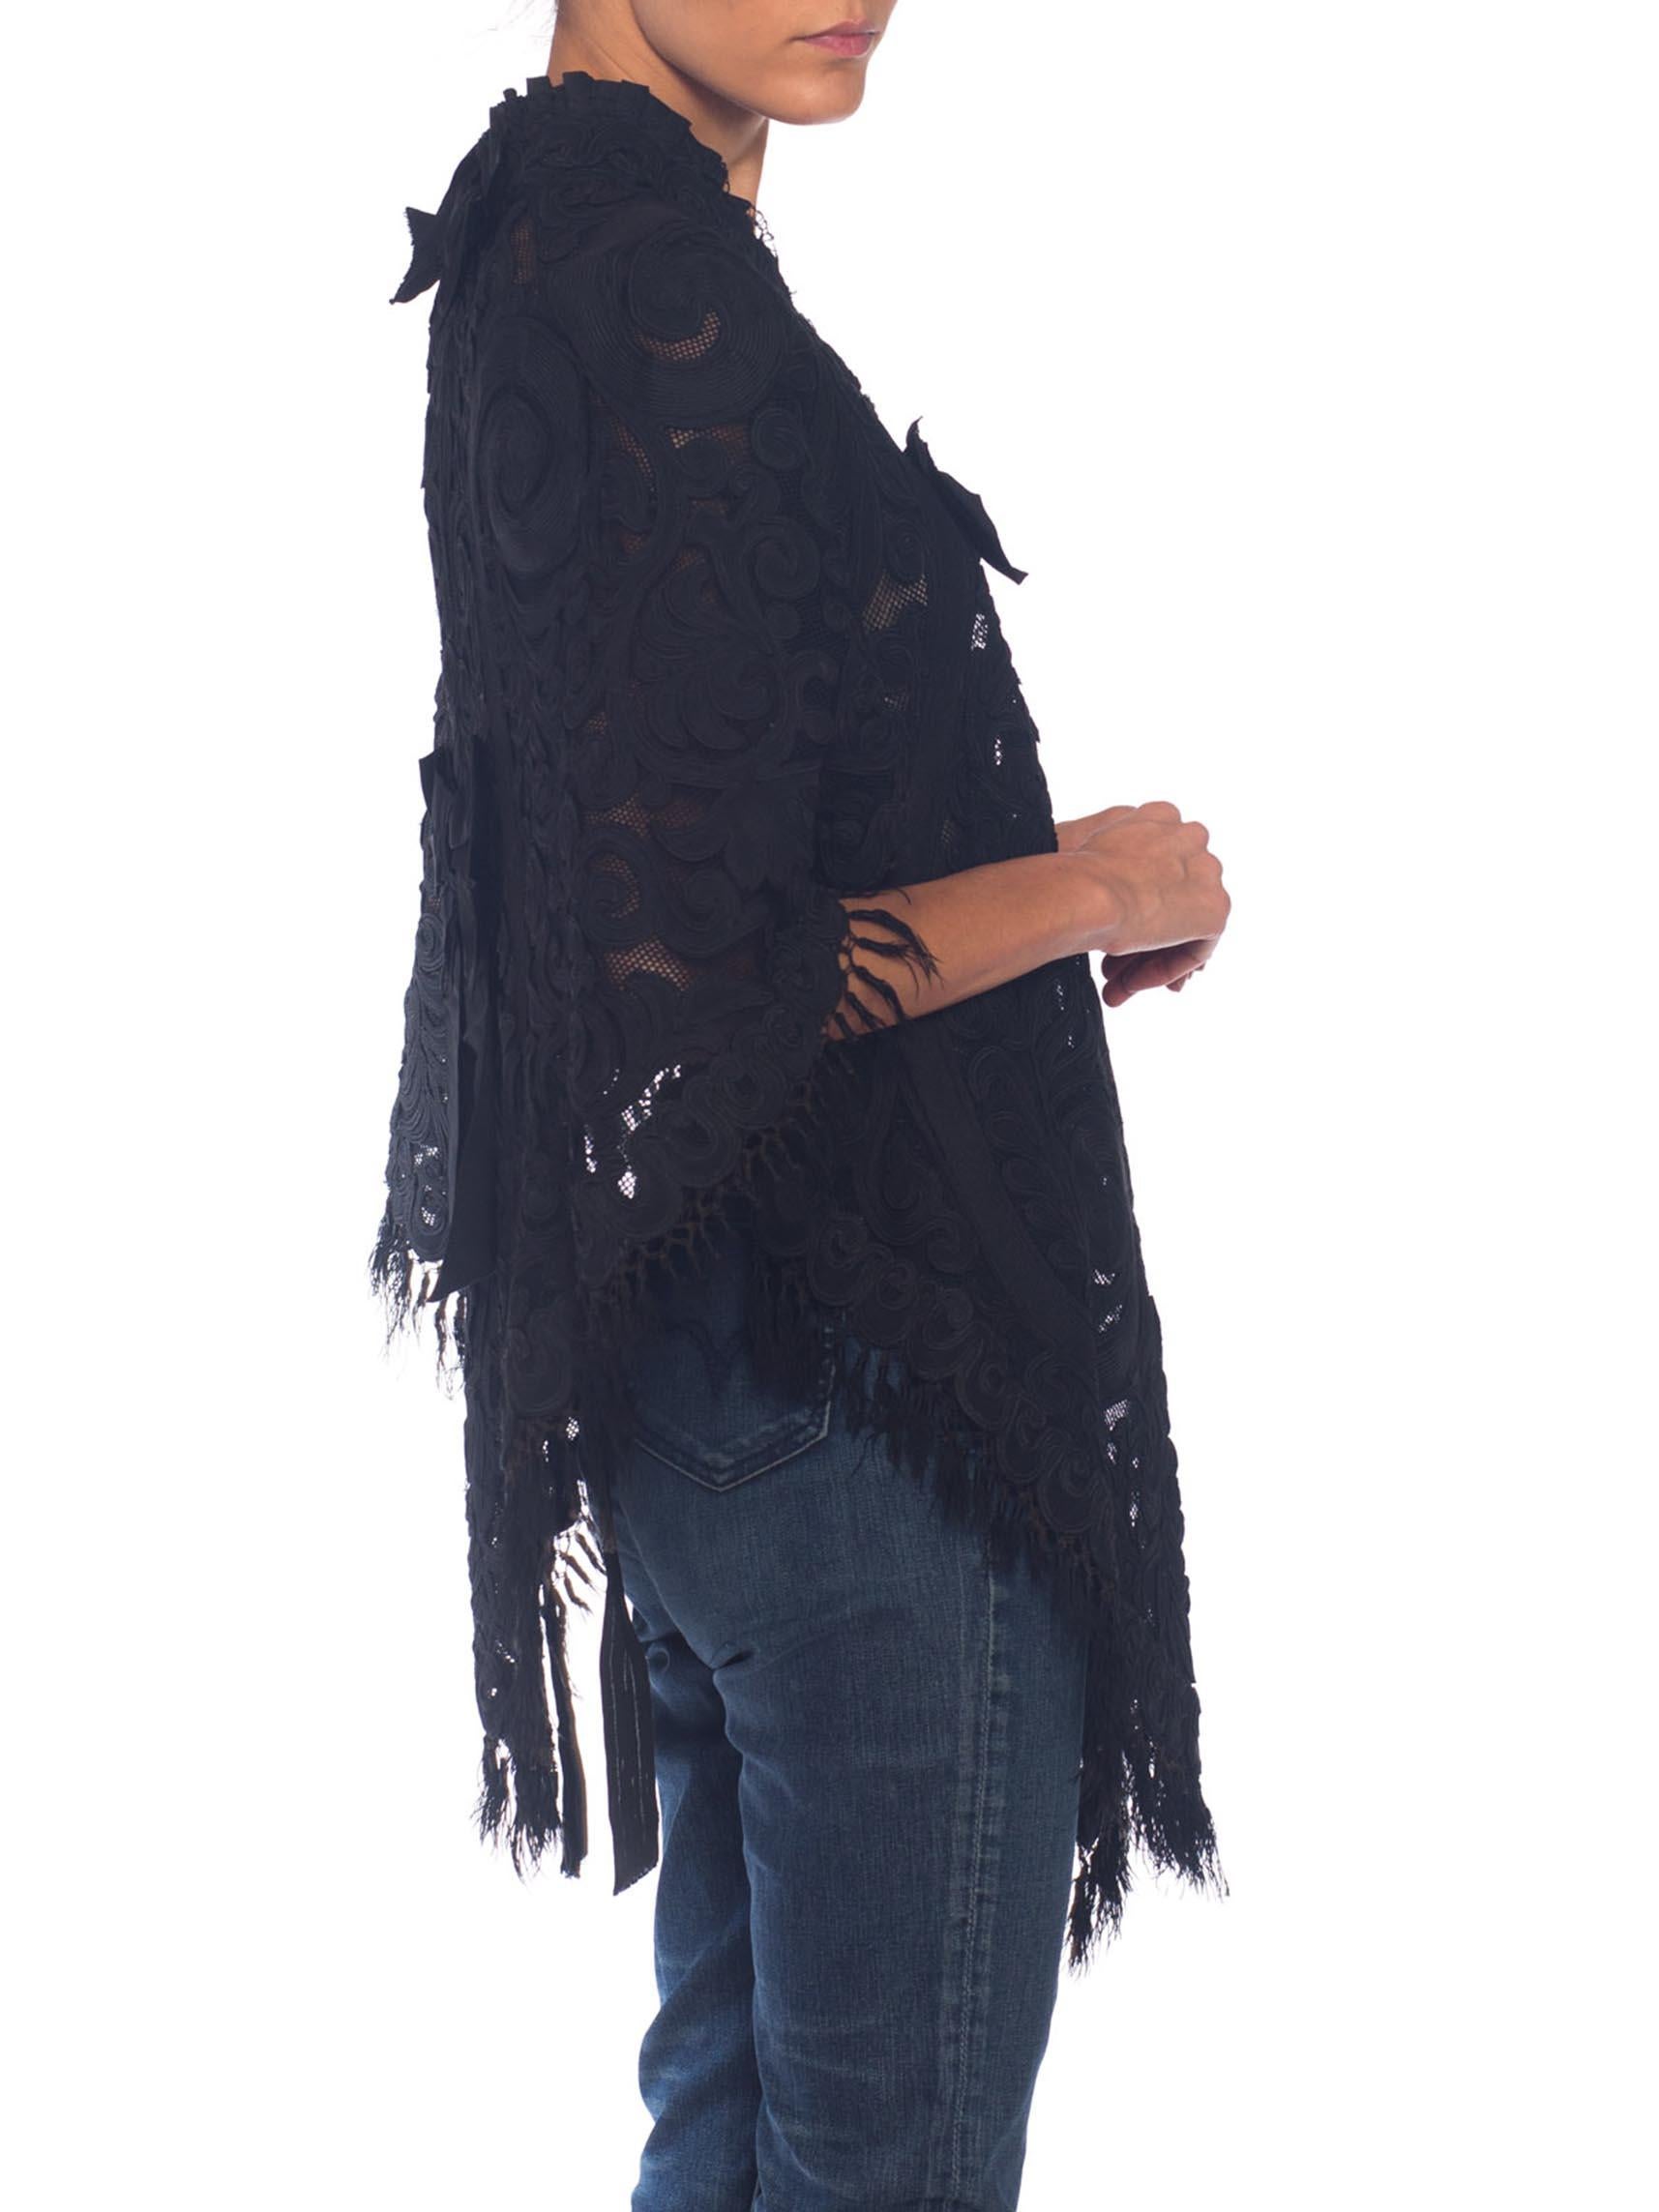 Victorian Black Silk & Cotton Net Appliquéd Dolman Styled Mantle Cape In Excellent Condition For Sale In New York, NY